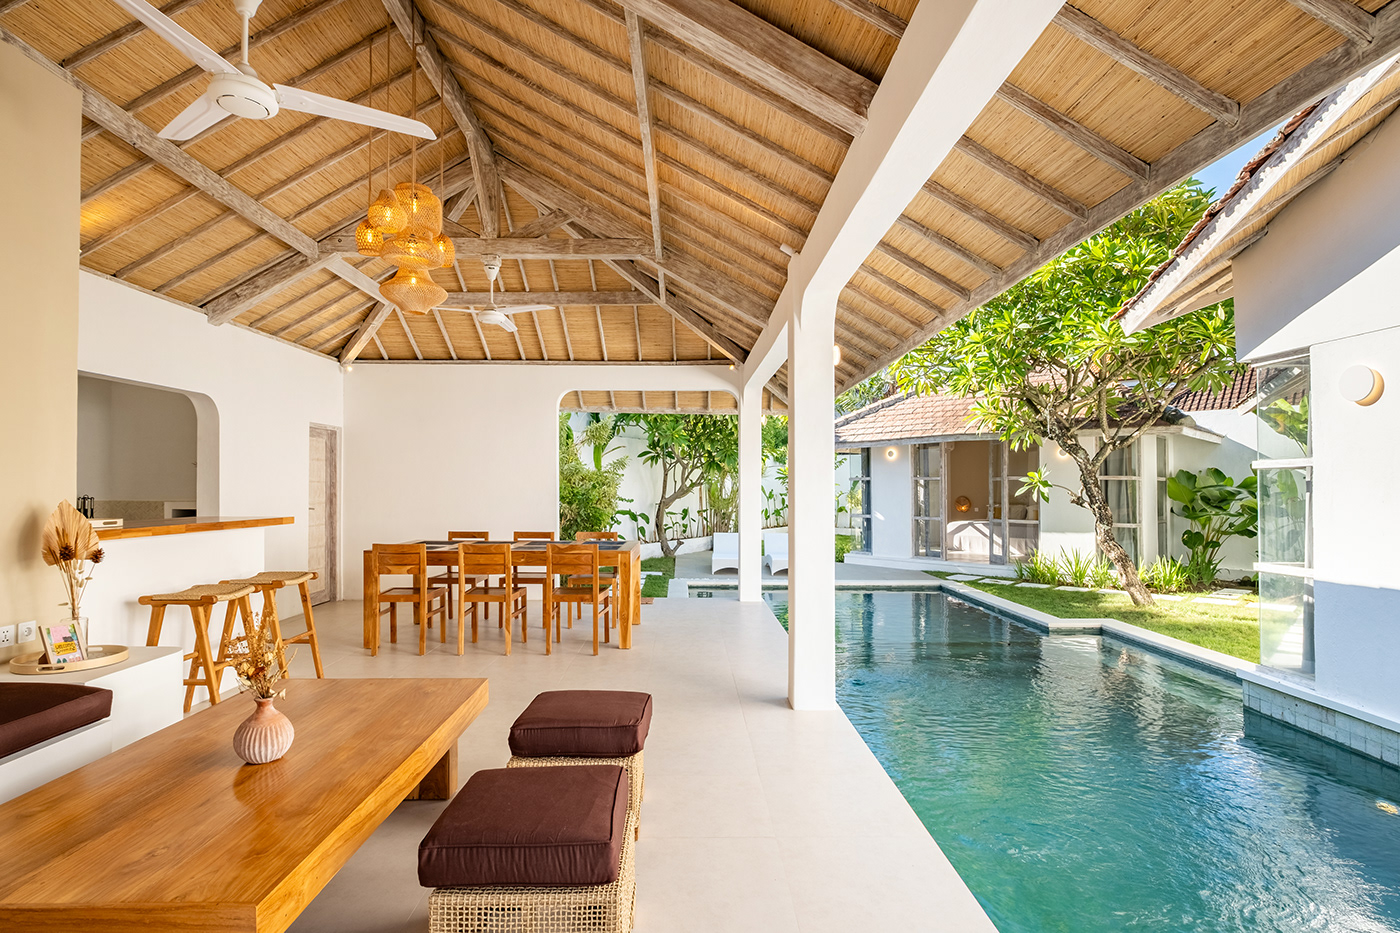 Villa bali indonesia Interior Photography photographer Architecture Photography Hospitality airbnb Travel